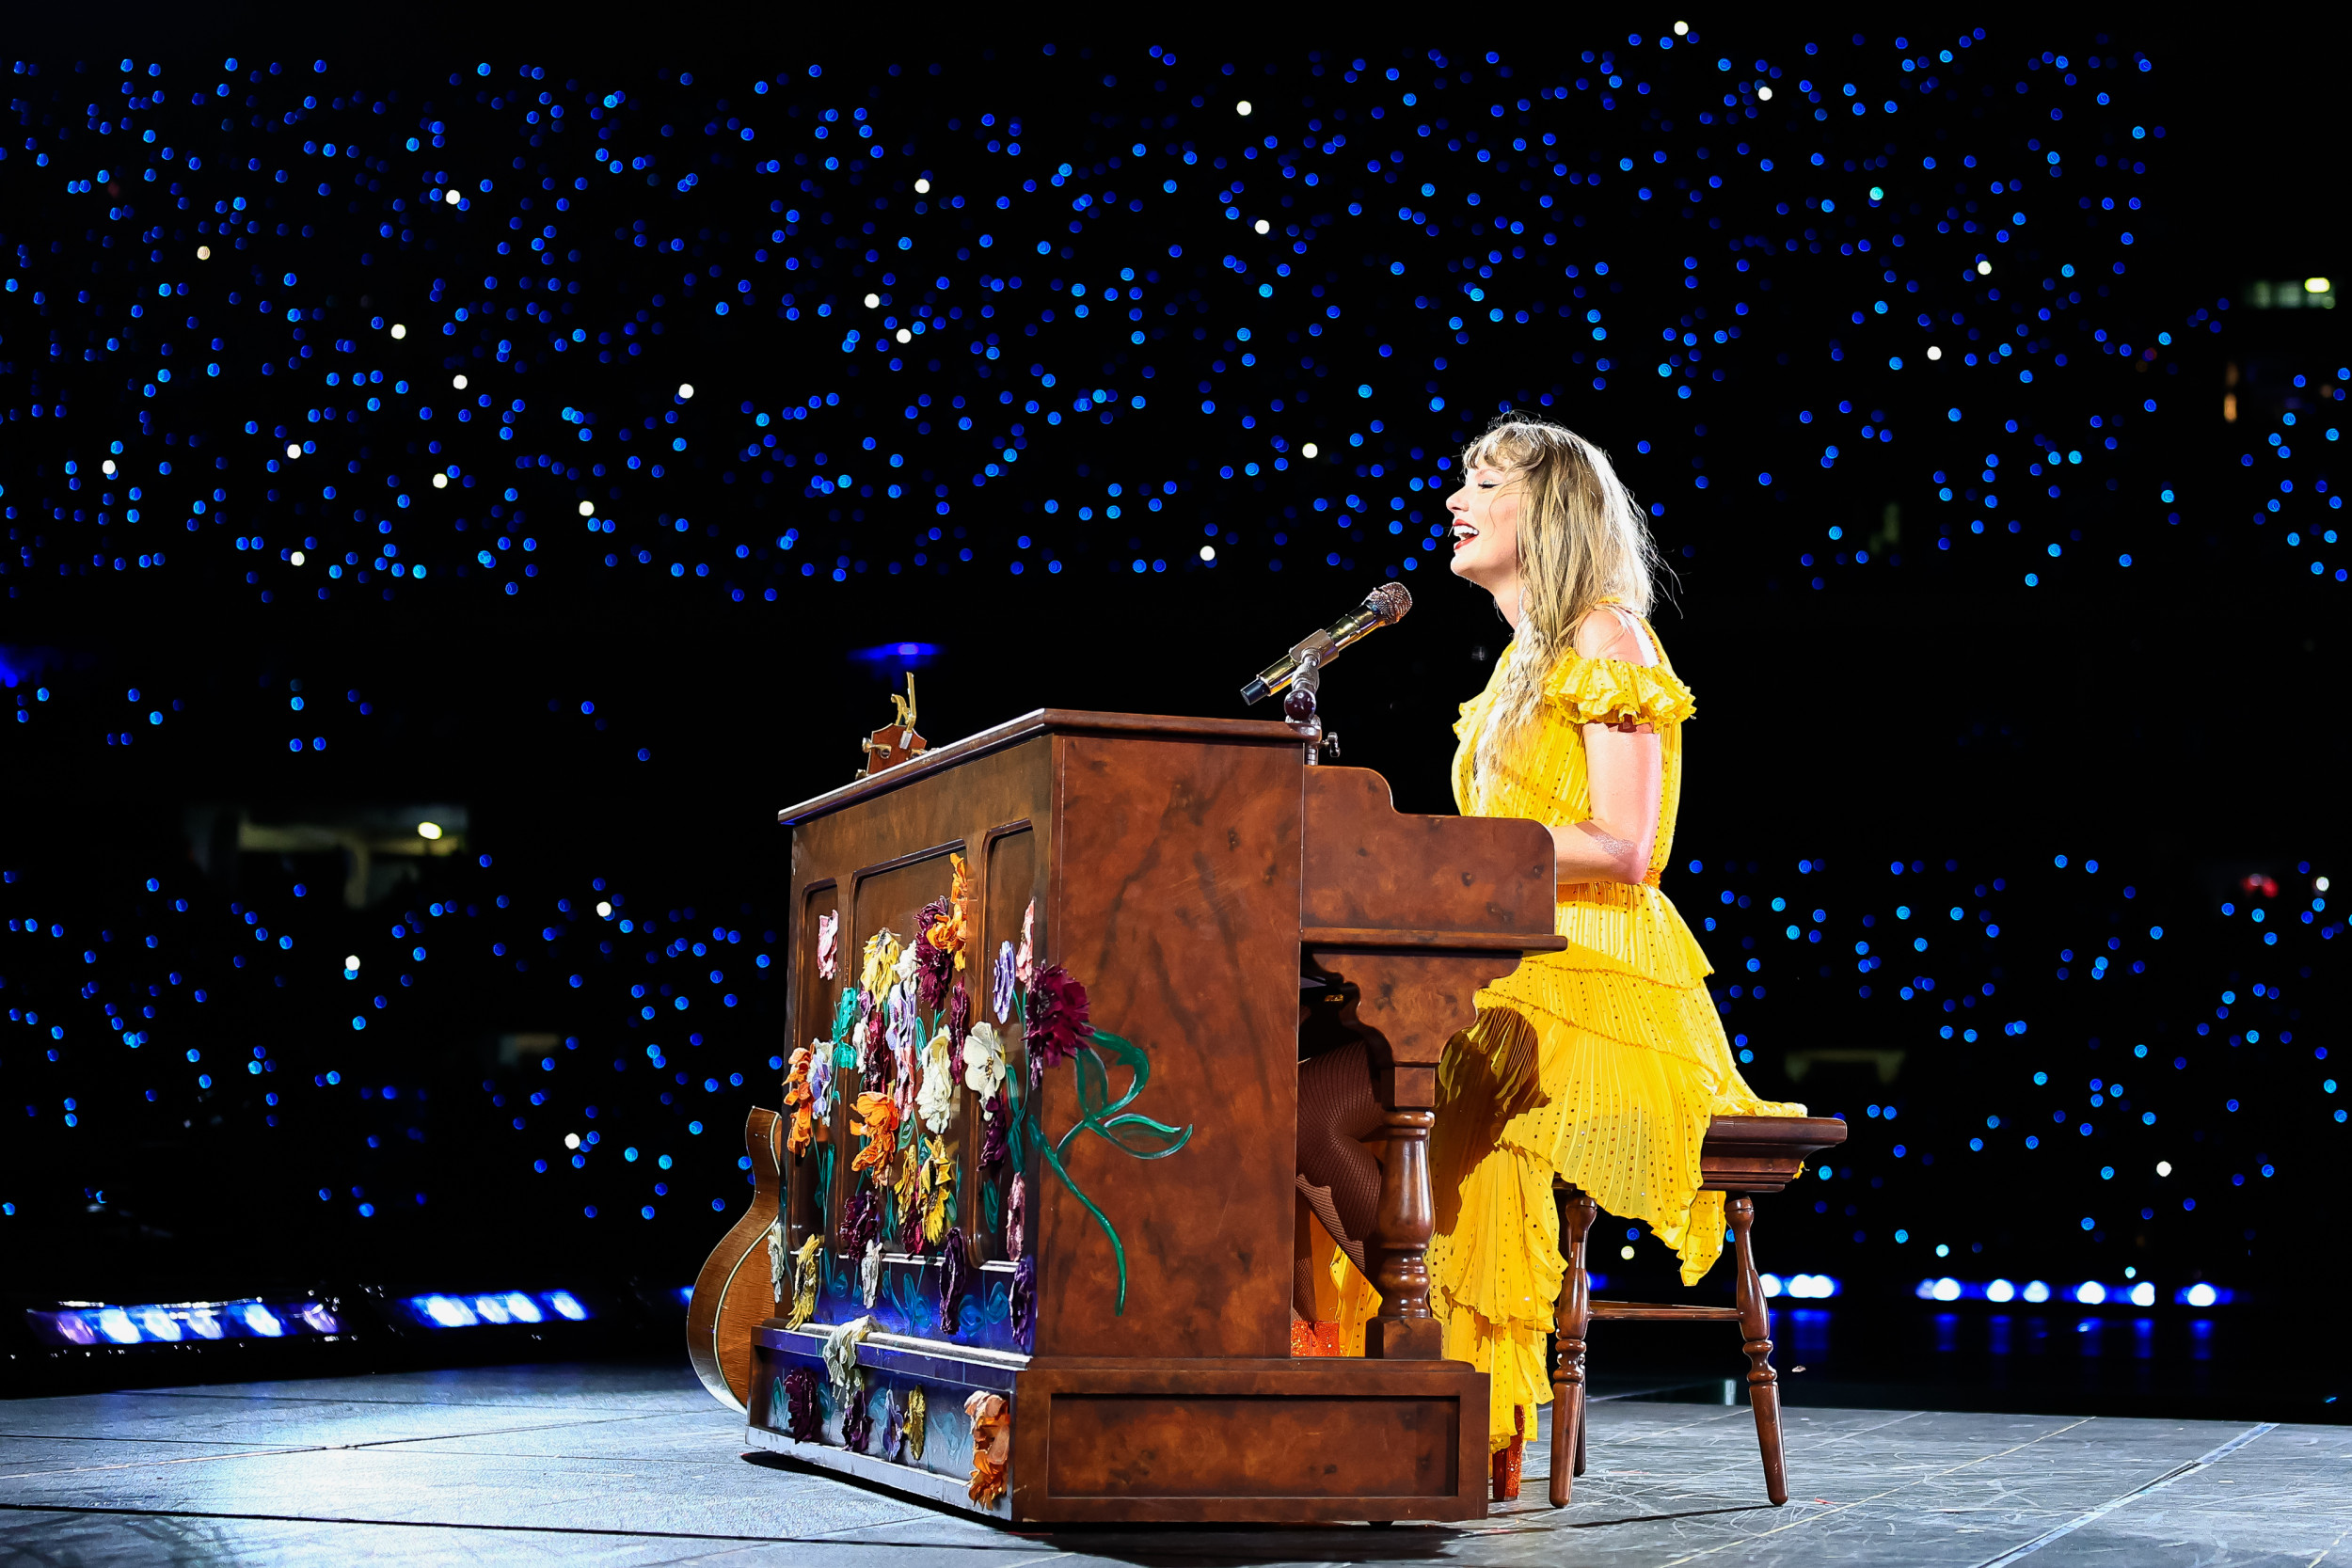 Taylor Swift’s piano problem during the show raises questions